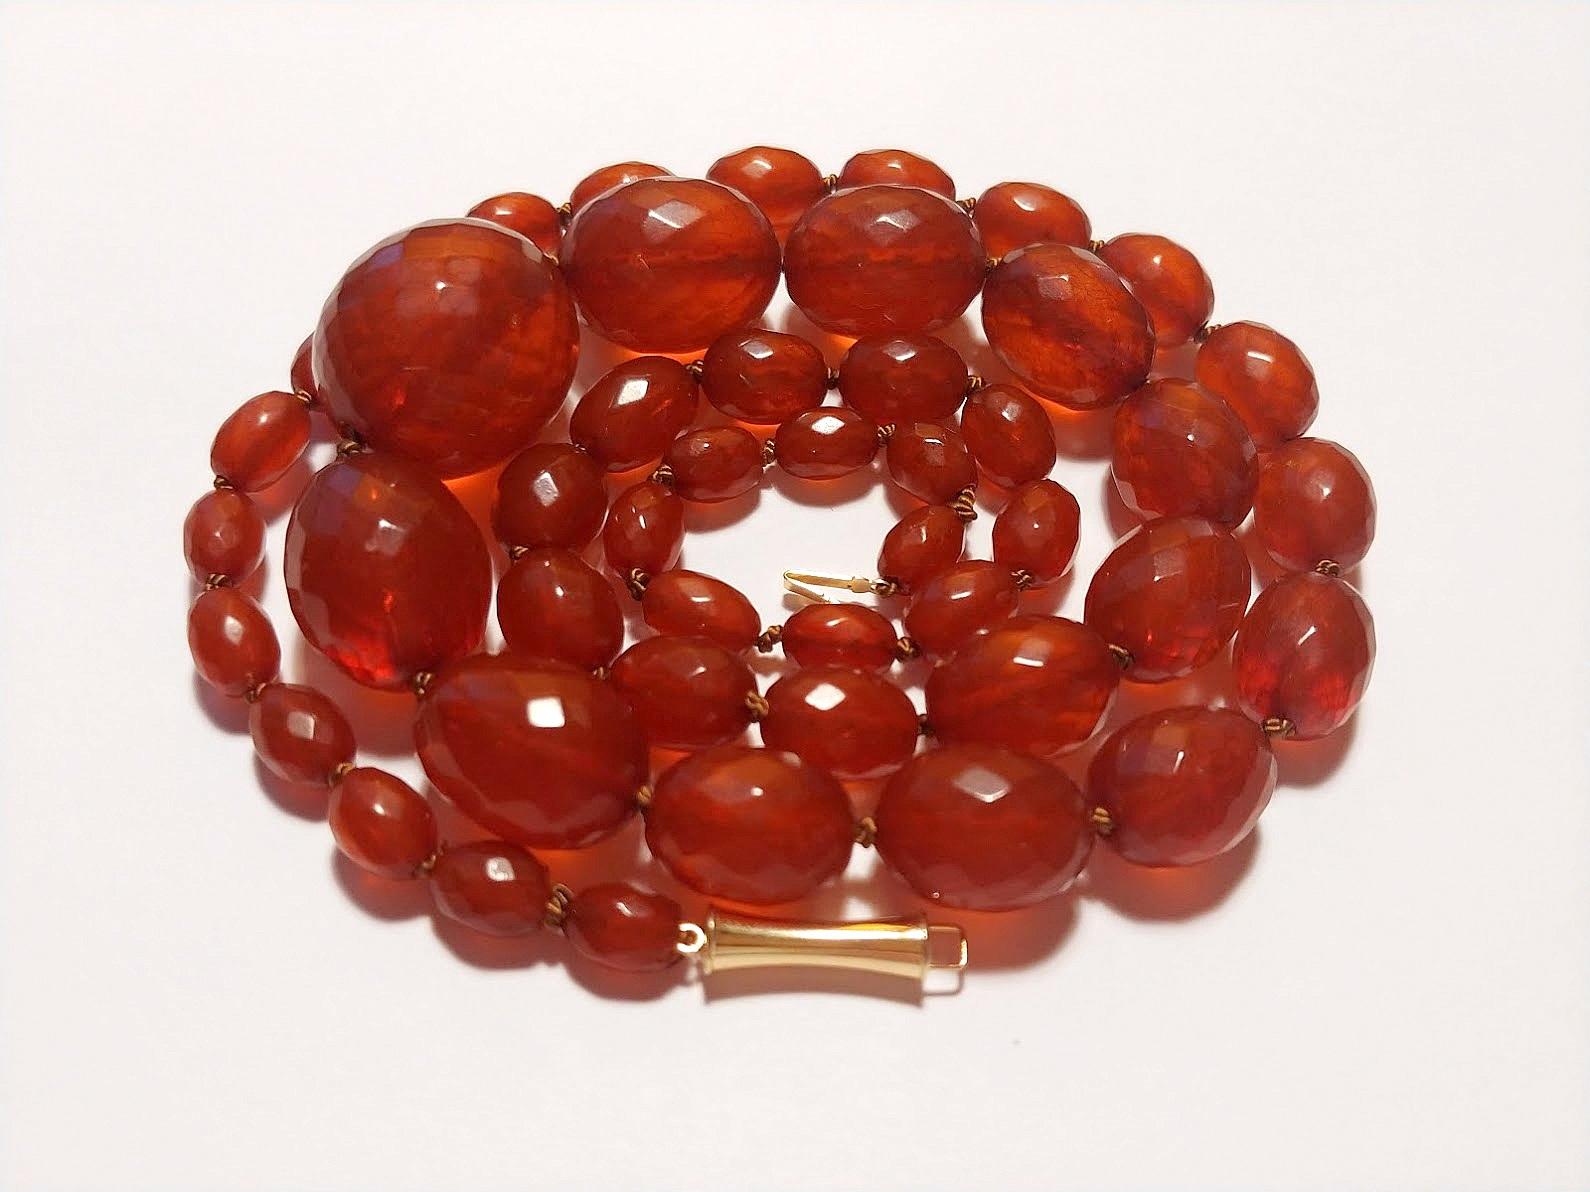 Genuine pre-war faceted Baltic amber

The length of the amber necklace is 28.5 inches (71 cm). The size of oval beads varies from 9 to 25.4 mm. The weight of the necklace is 48 grams. Long! Weightless!
The color of the beads is saturated cognac.
The